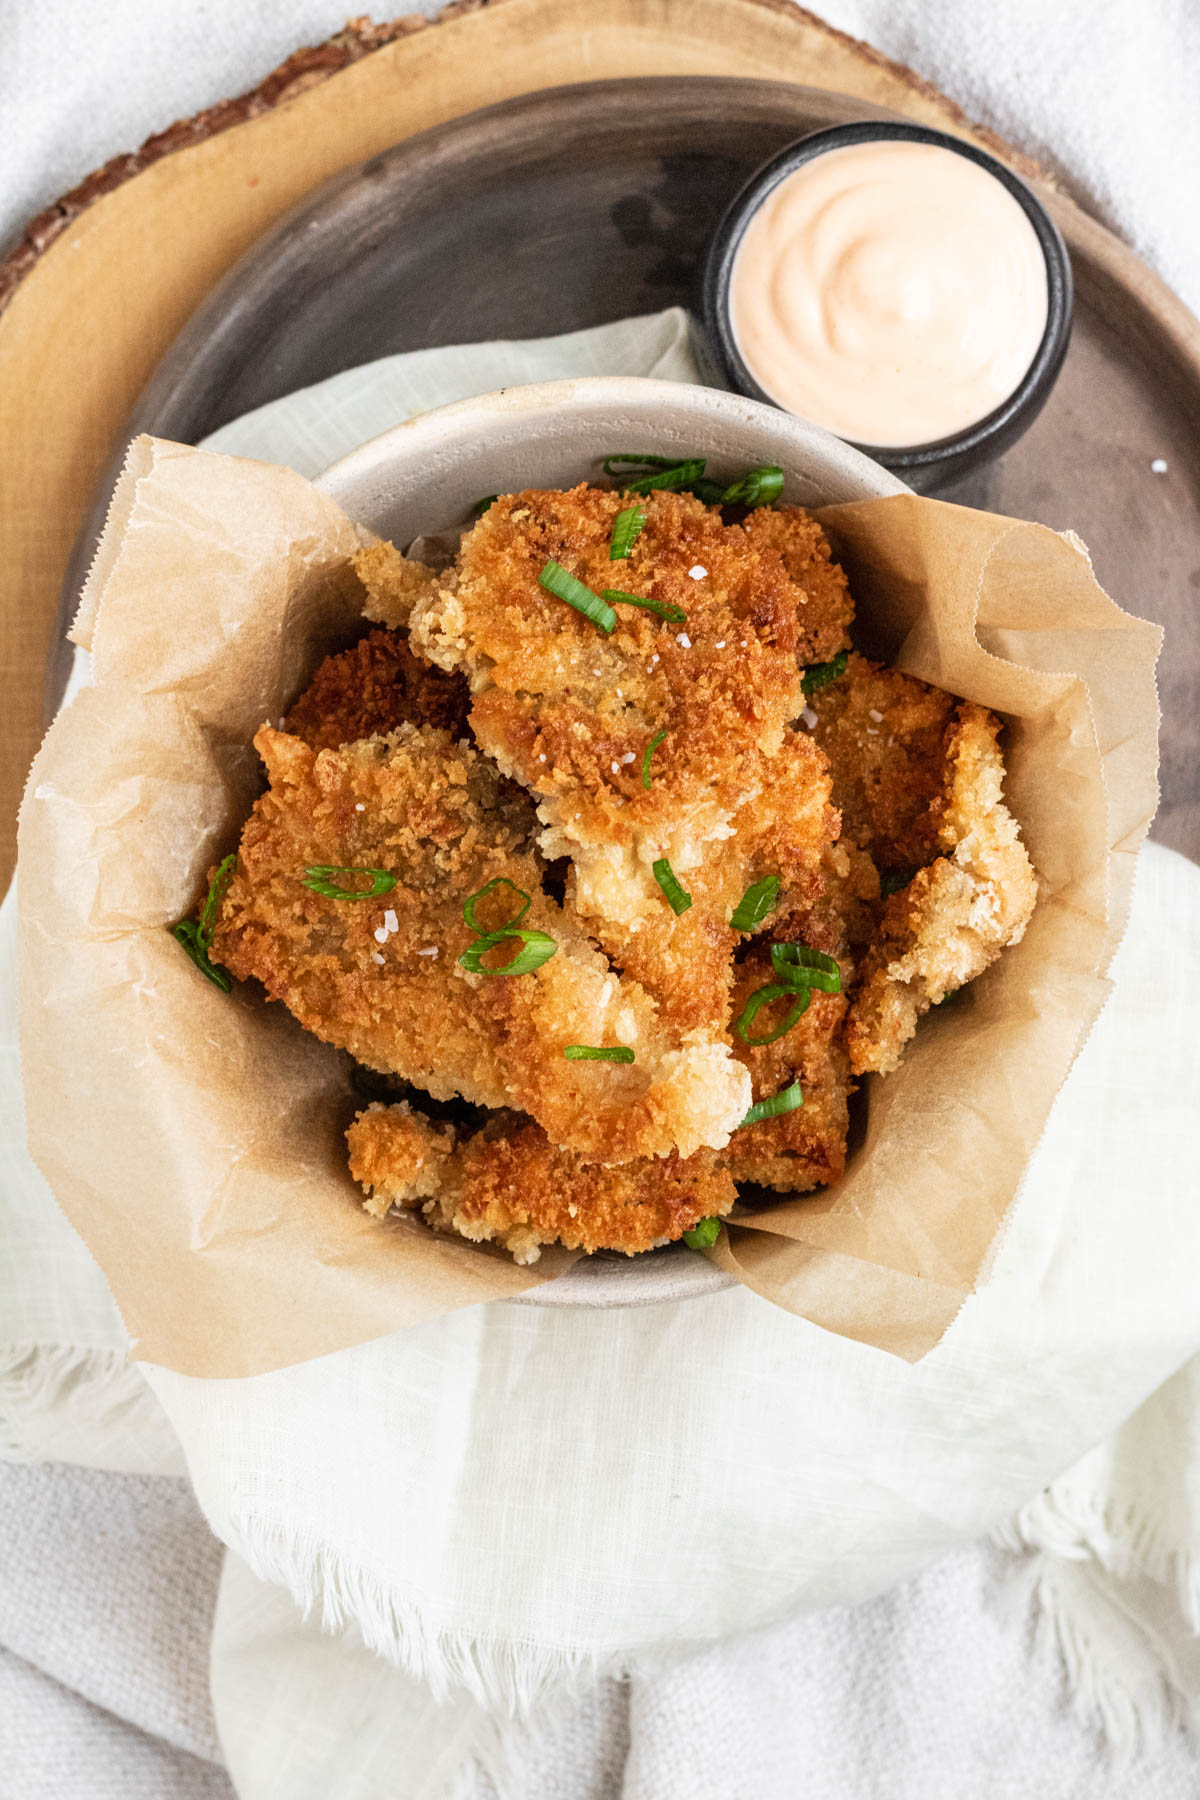 Golden brown breaded and fried mushrooms in a bowl.